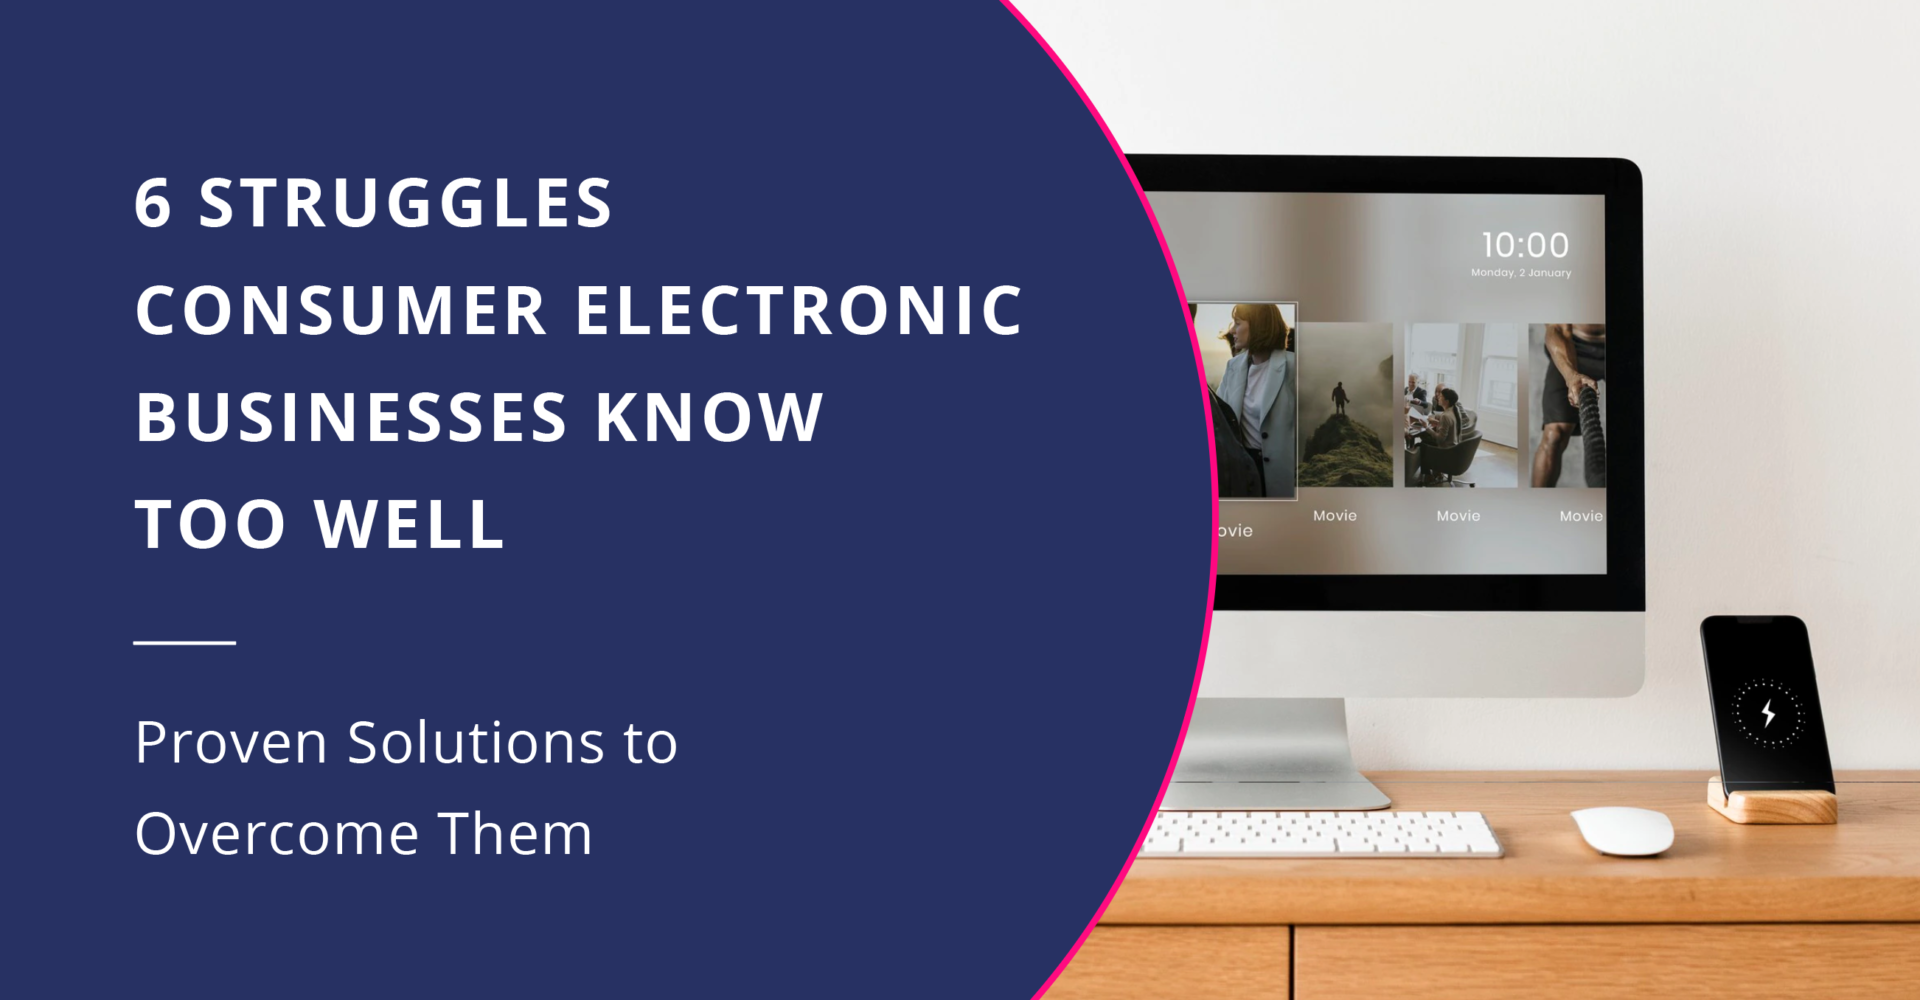 6 Struggles E-commerce Businesses in Consumer Electronics Know Too Well + (Proven Solutions)